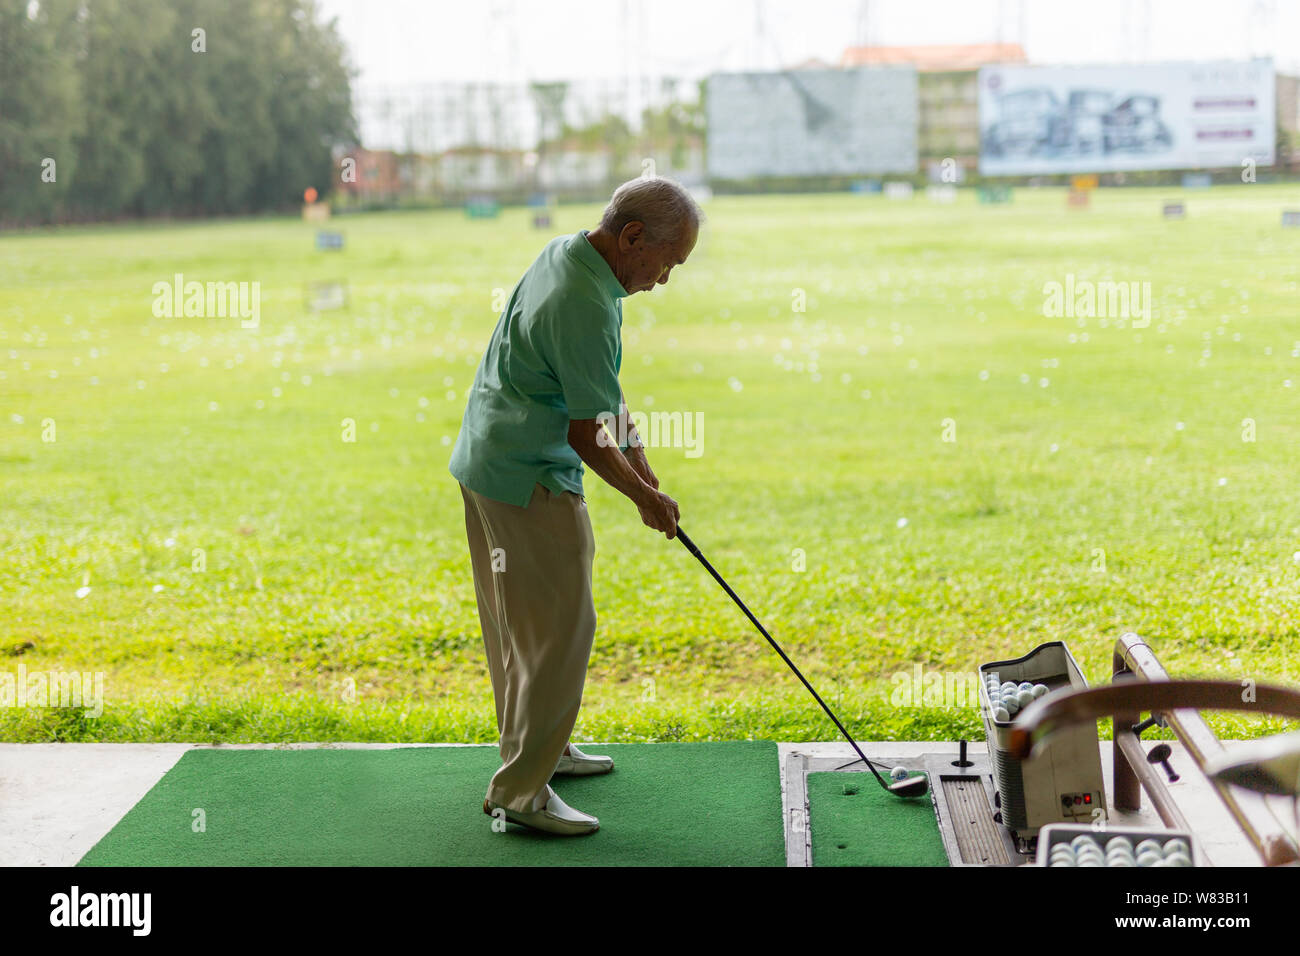 Is Golf Driving Range Good Exercise 